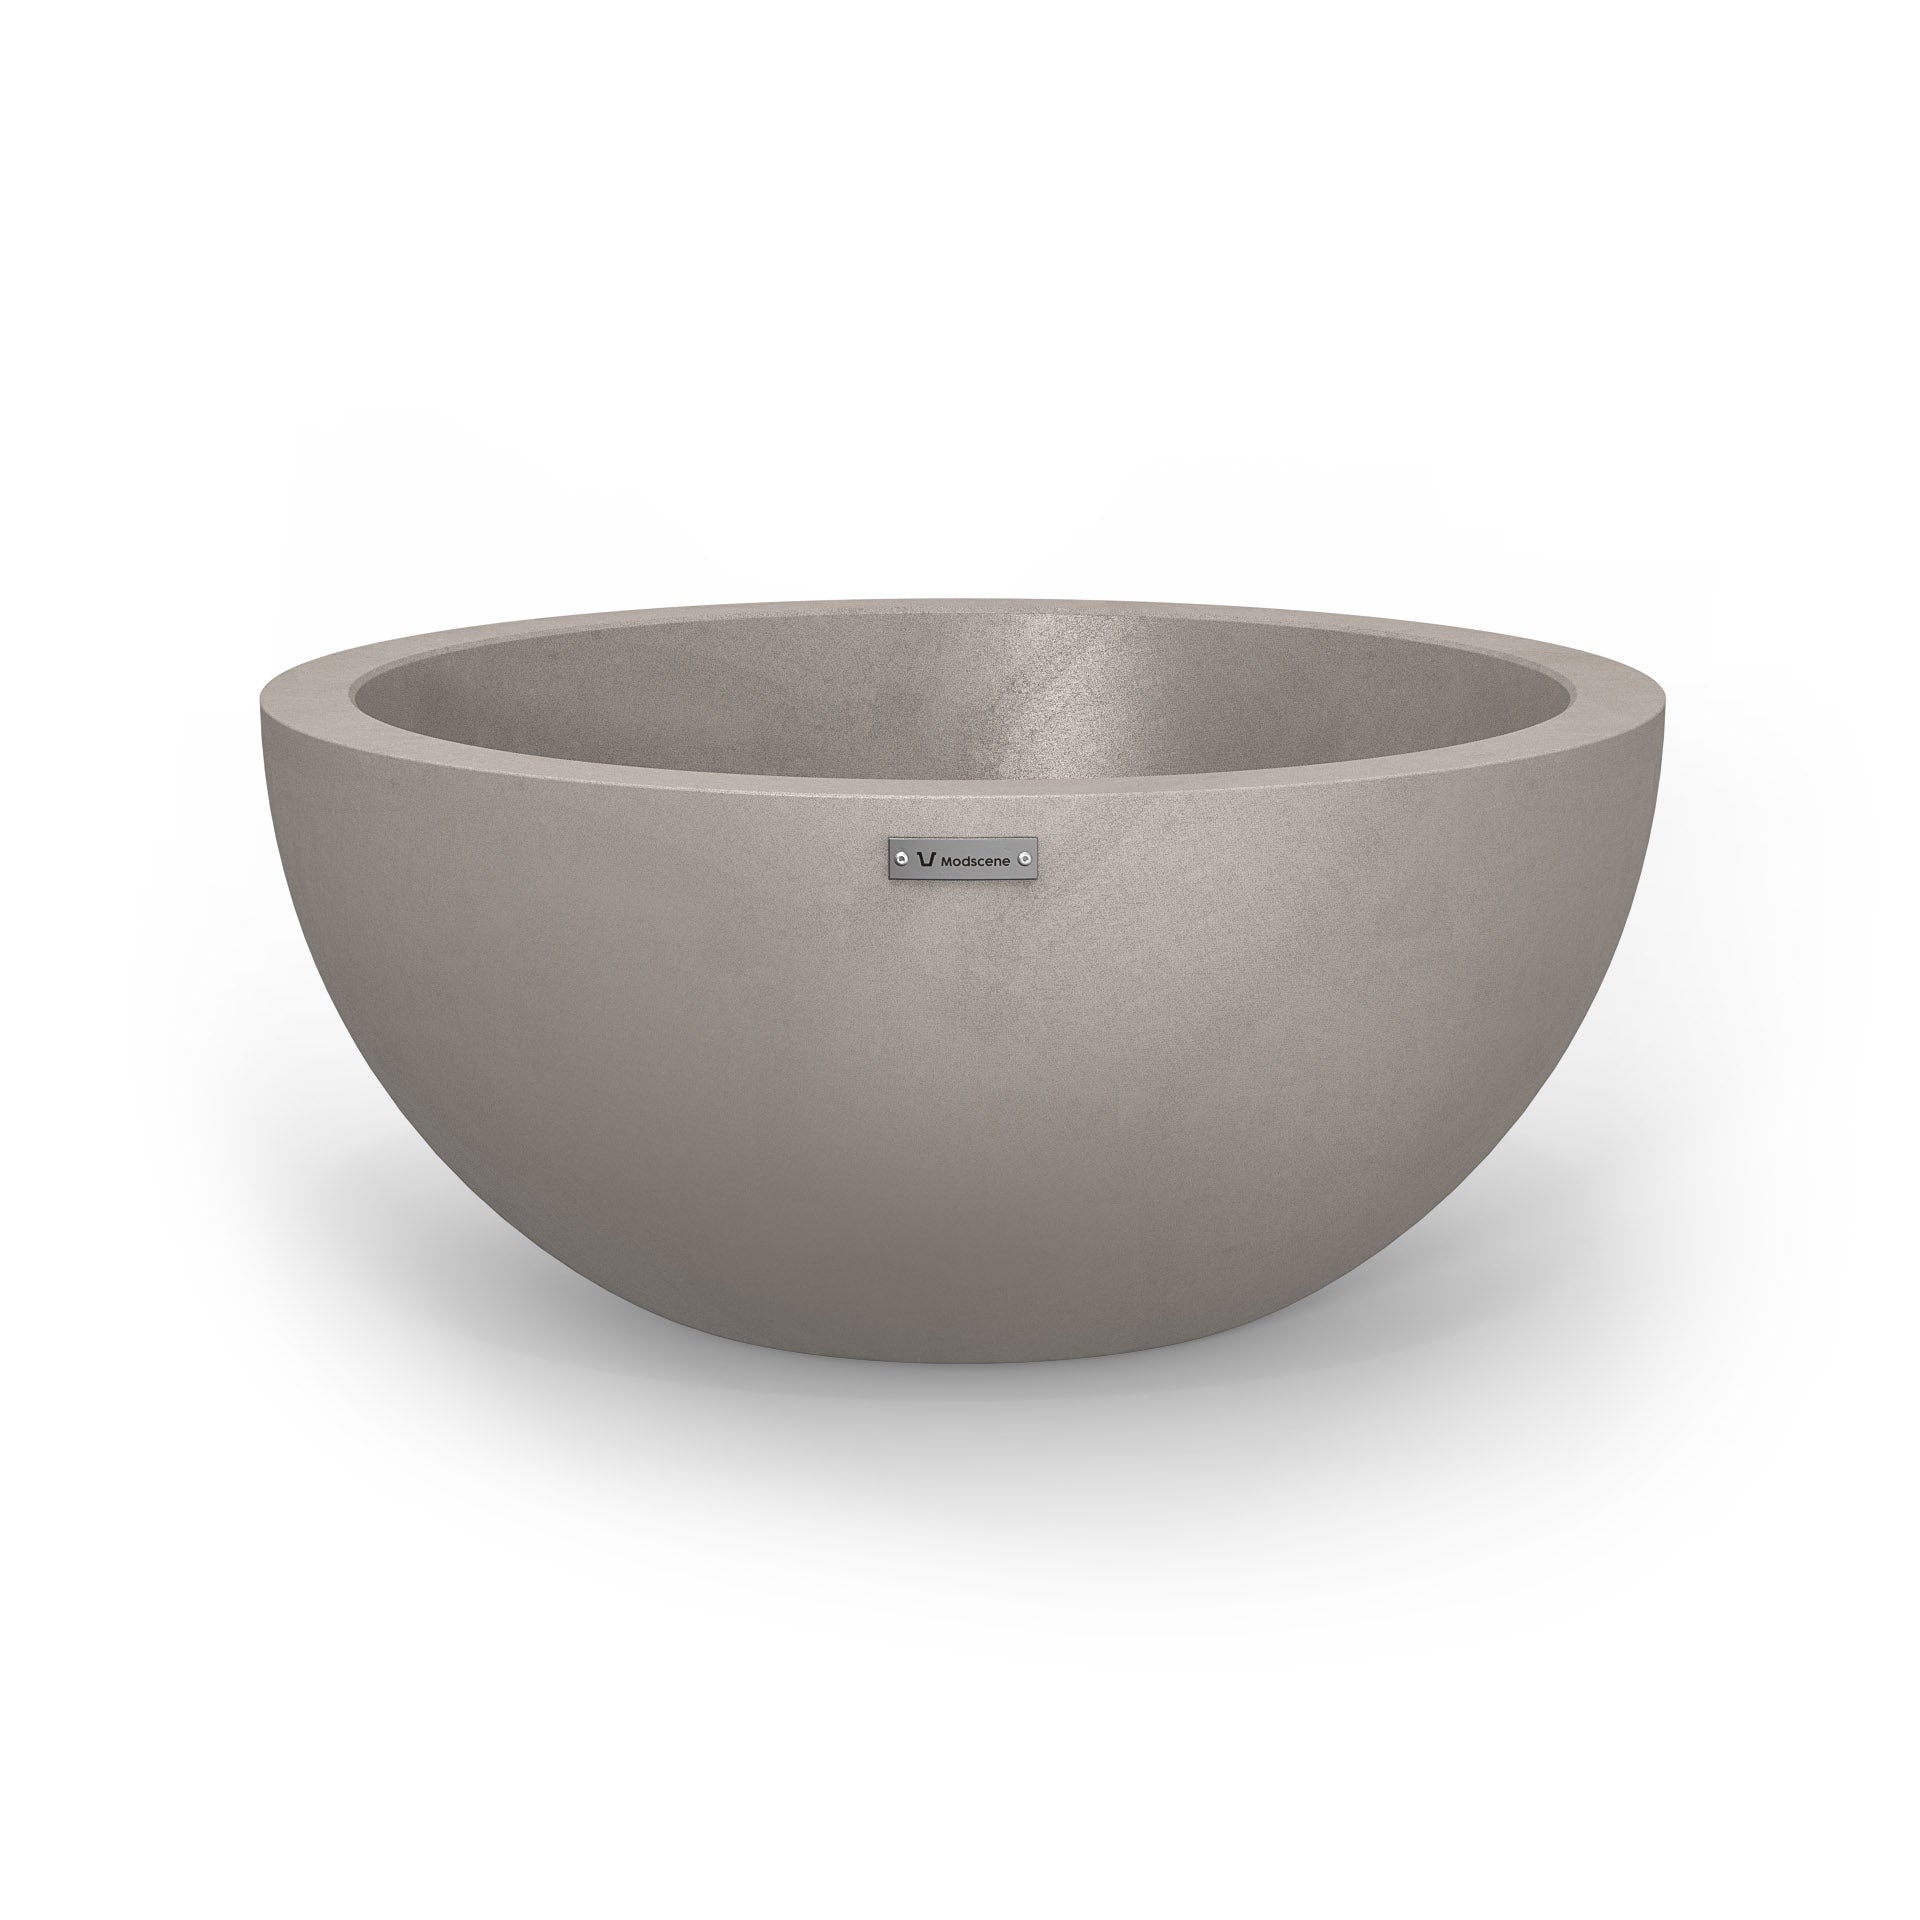 A large planter bowl in a sandstone grey colour with a concrete look finish.